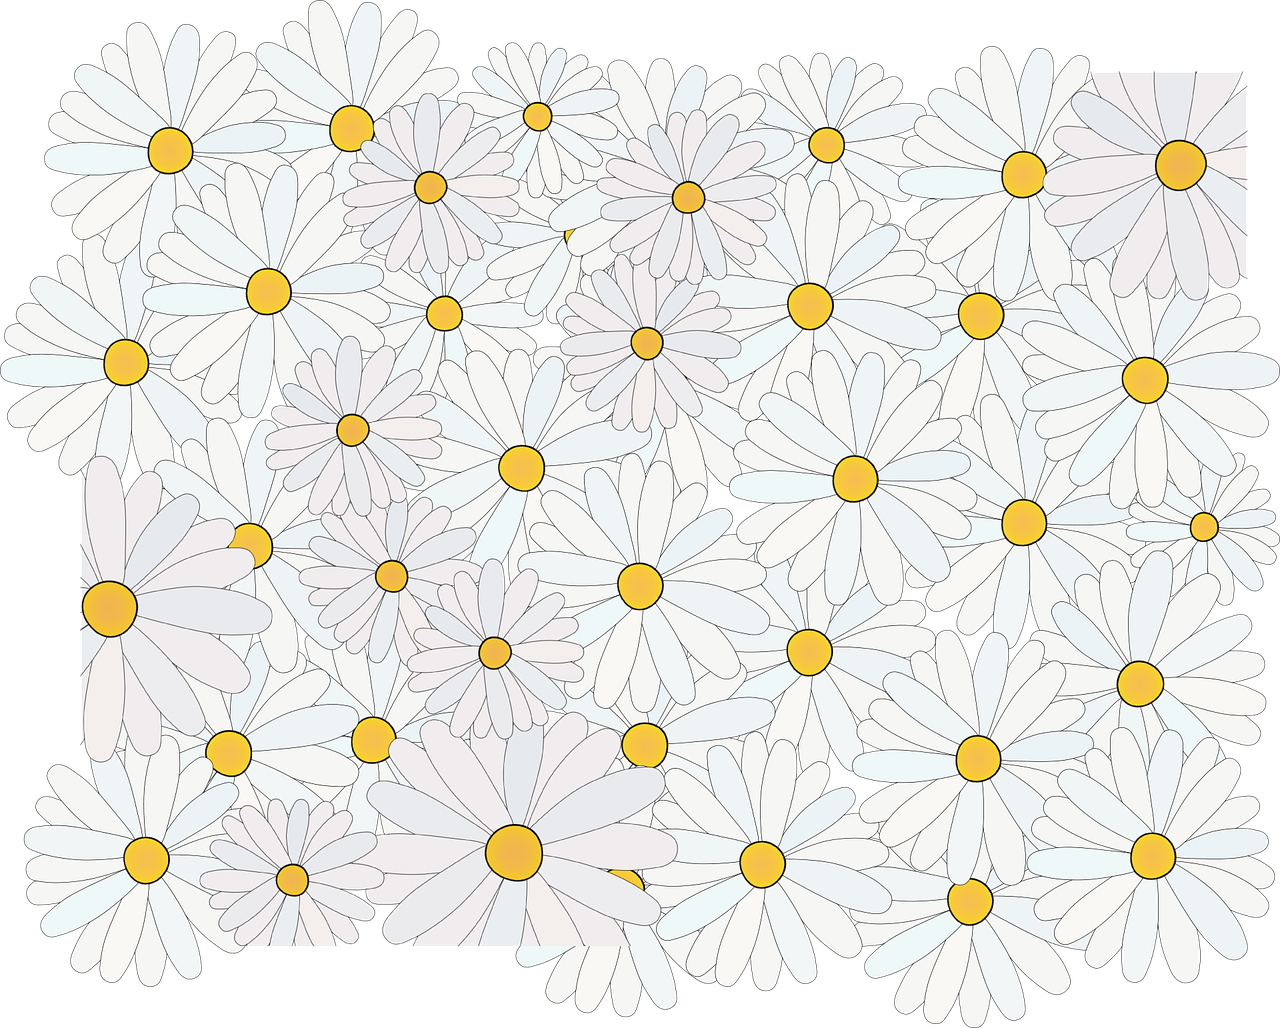 a bunch of white flowers with yellow centers, an illustration of, by Murakami, pixabay, black color on white background, chamomile, full color illustration, pattern with optical illusion